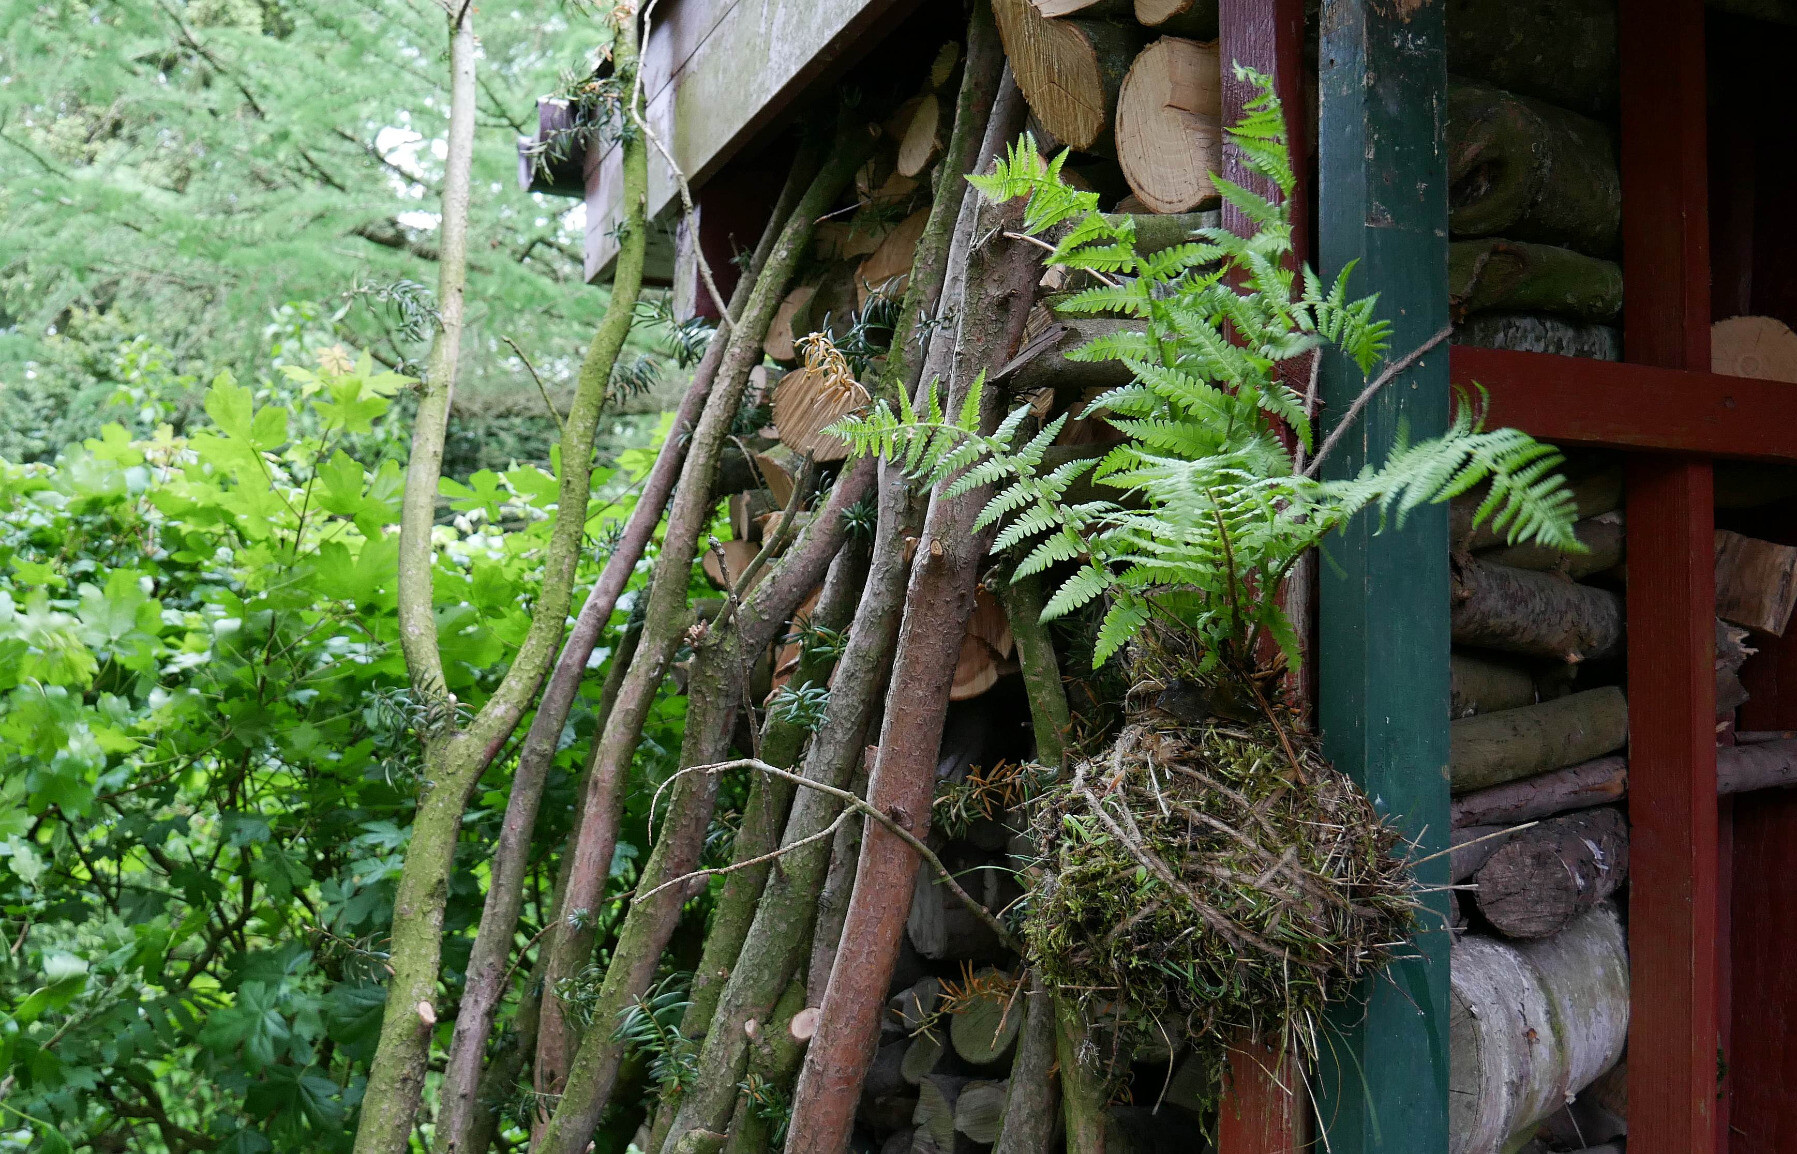 a fern kokedama hanging in front of some firewood and a hedge